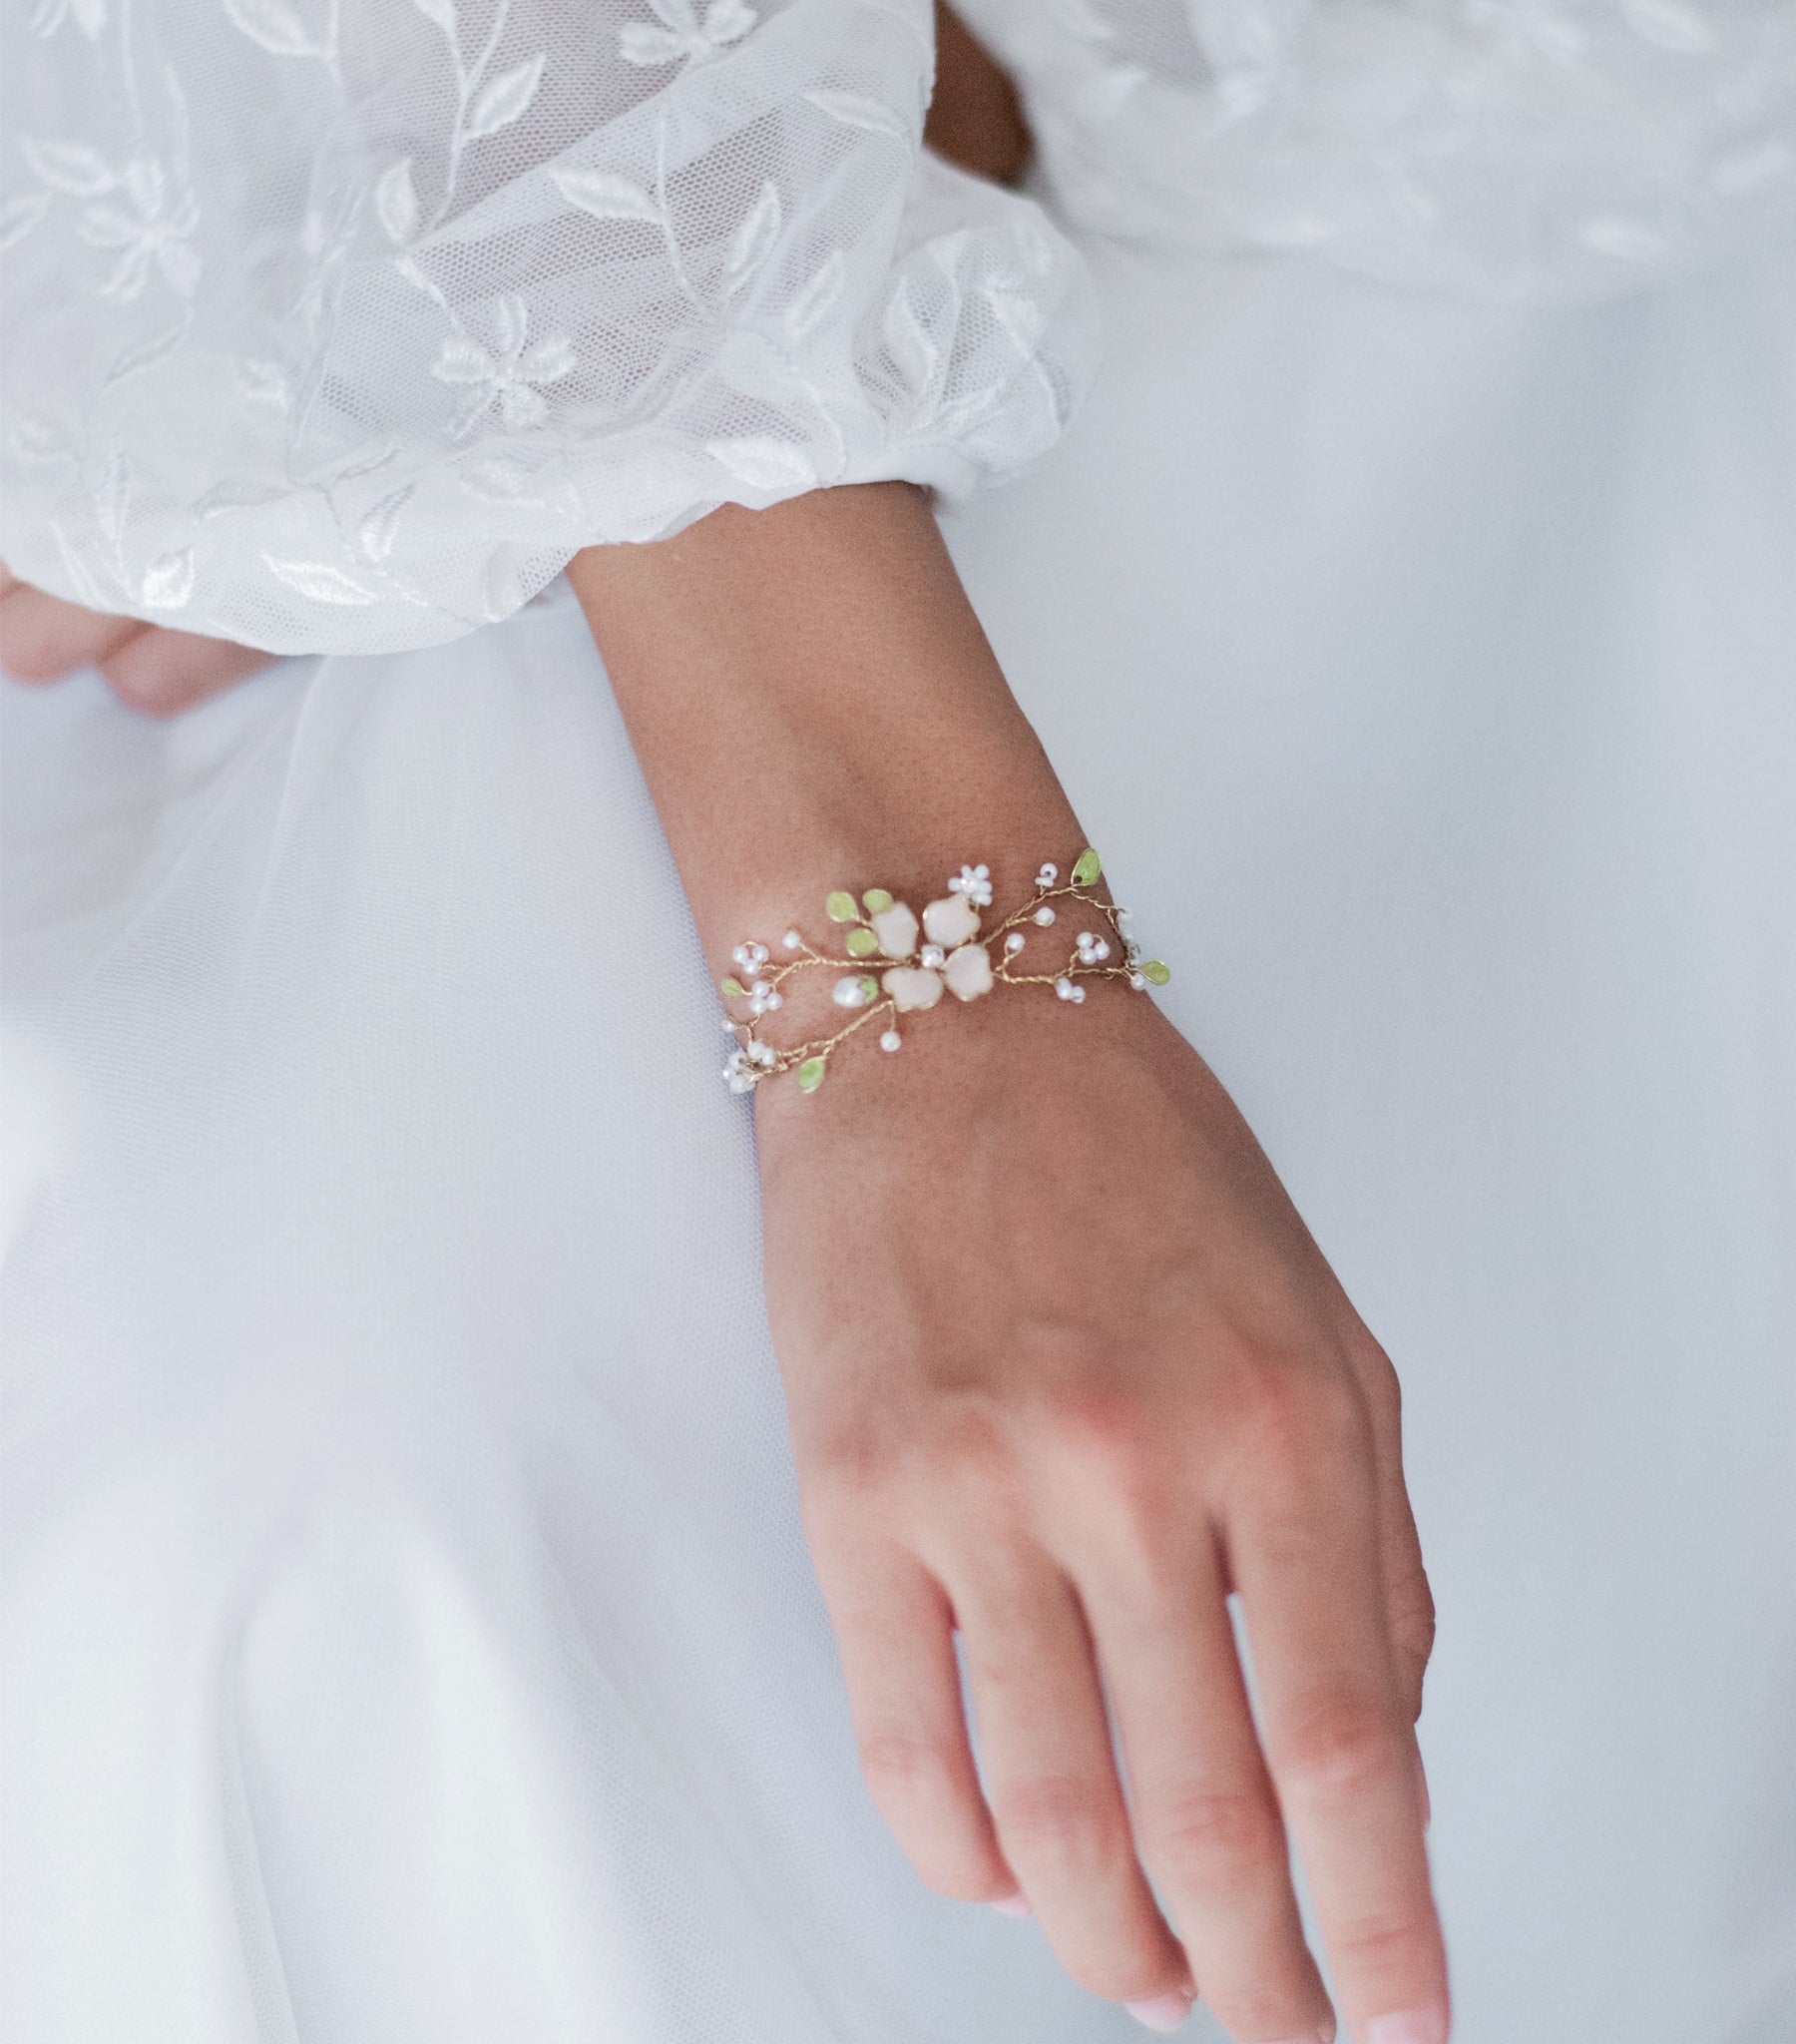 Wedding Bracelets On Hands Of Bridesmaids Outdoor Stock Photo, Picture and  Royalty Free Image. Image 63139640.